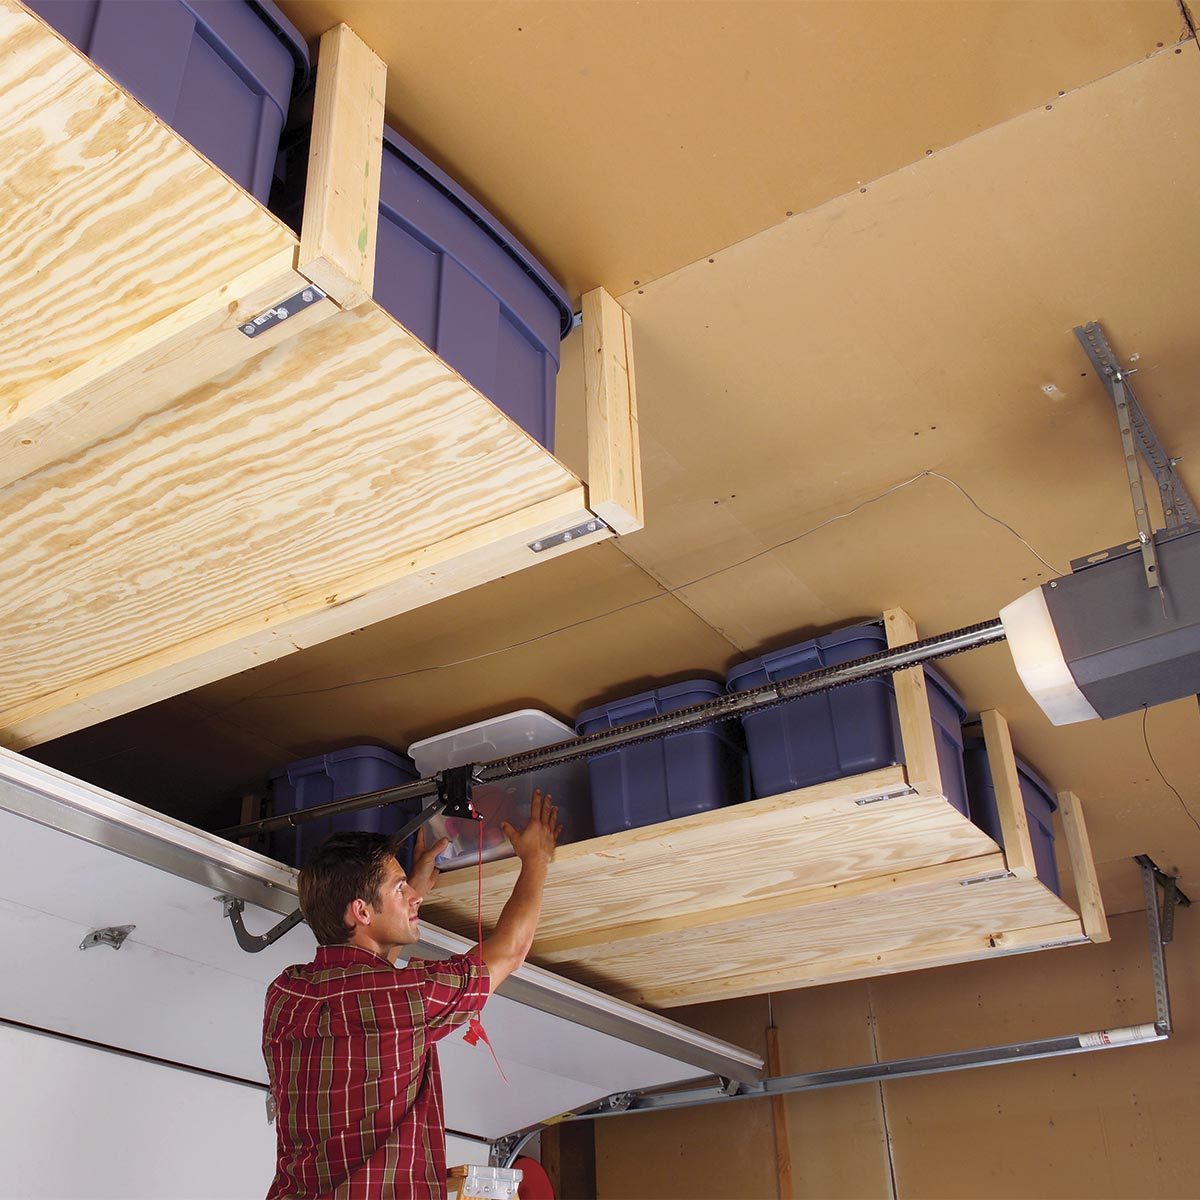 24 DIY Garage Storage Projects That Save Space and Money